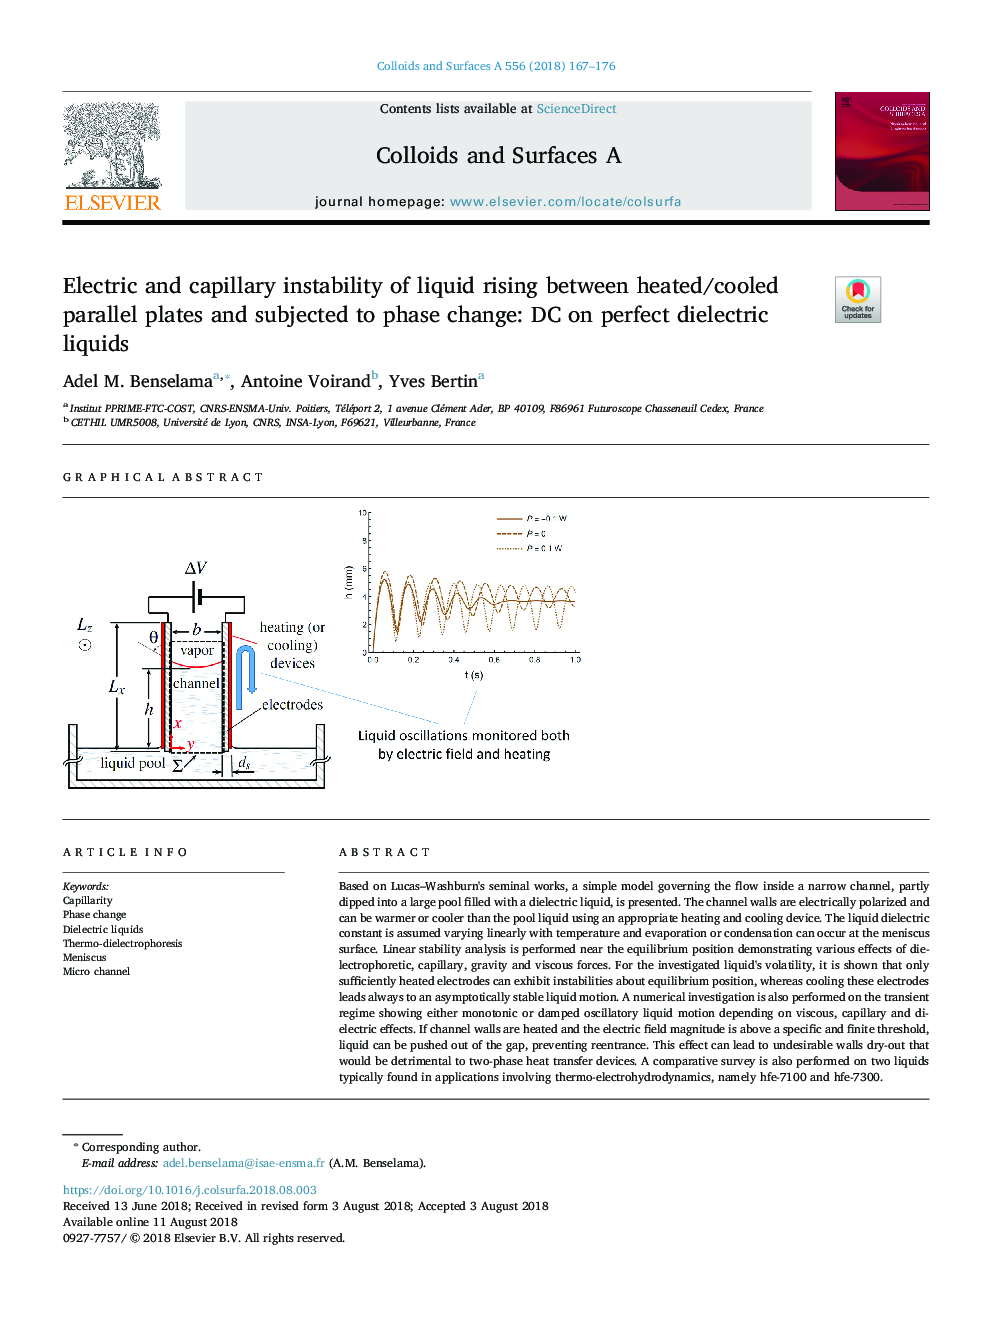 Electric and capillary instability of liquid rising between heated/cooled parallel plates and subjected to phase change: DC on perfect dielectric liquids